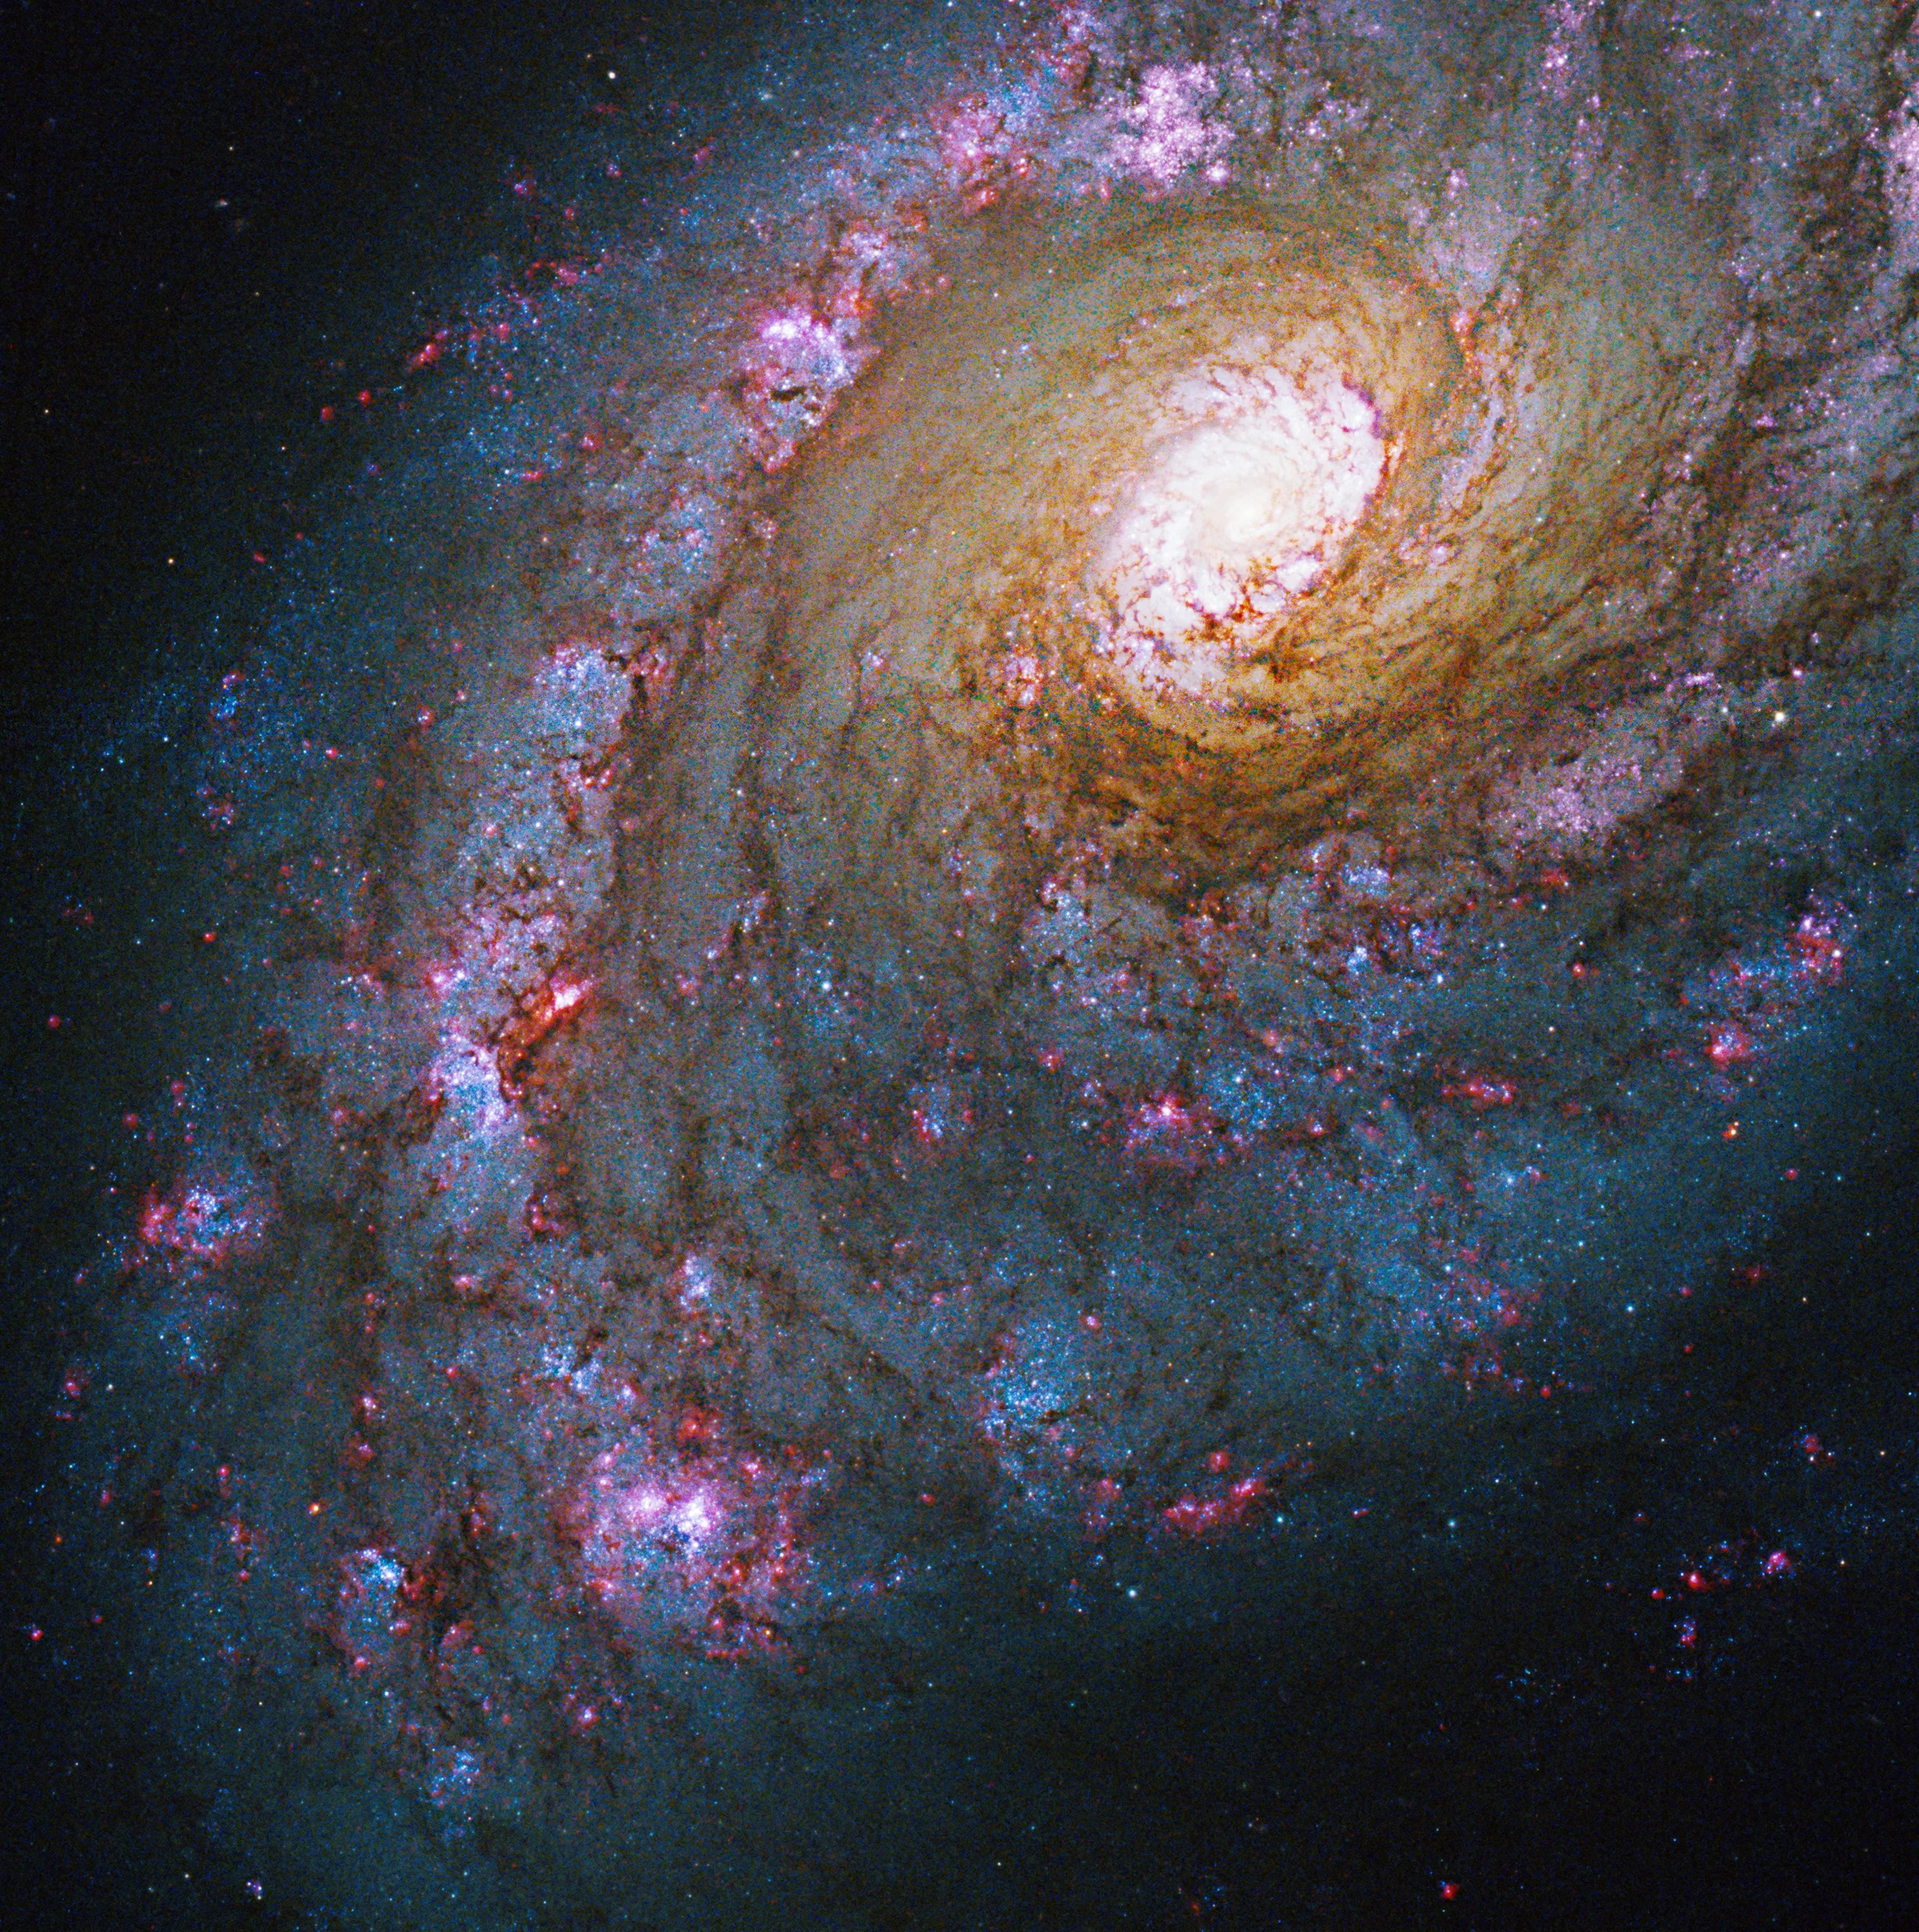 This spiral galaxy is shaped like a hurricane, with a glowing white spherical center. The arms of gas and dust closest to the center are orange, brown, and pale yellow in color. Farther away from the center, the arms are pink scattered with red, and surrounded by blue stars.